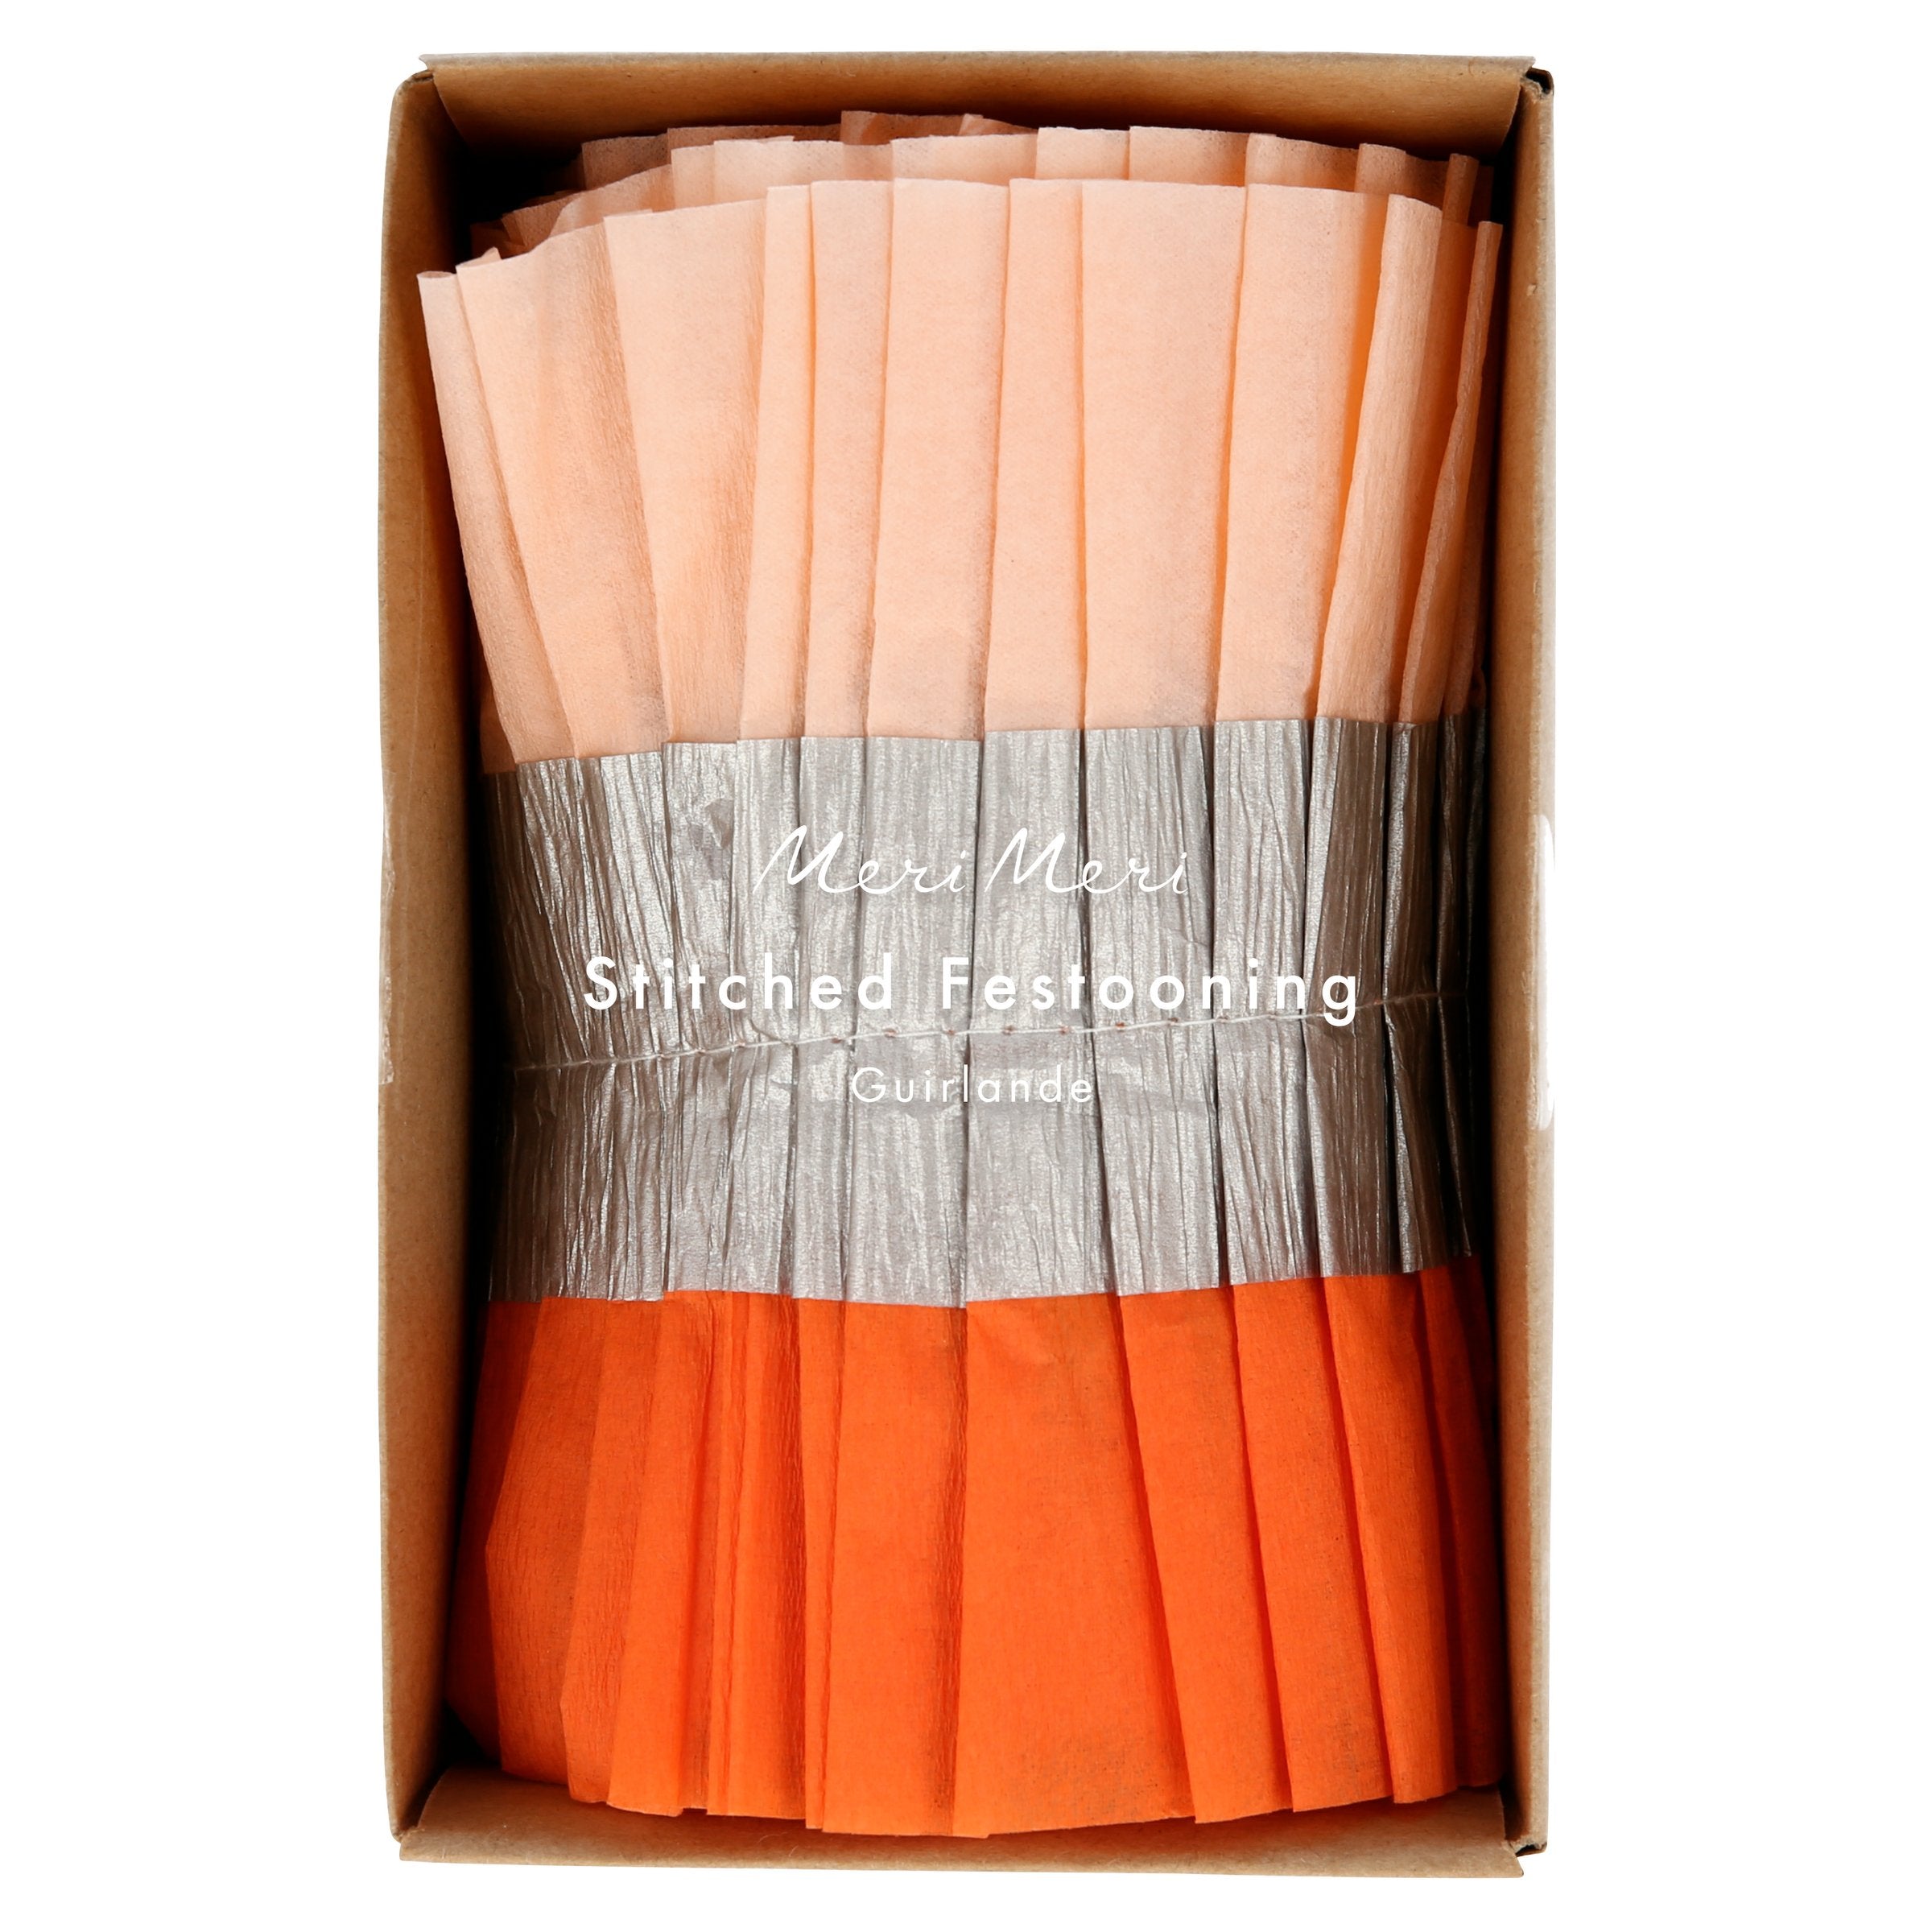 Our pastel party streamers are a stylish way to add color to your Halloween party decorations.